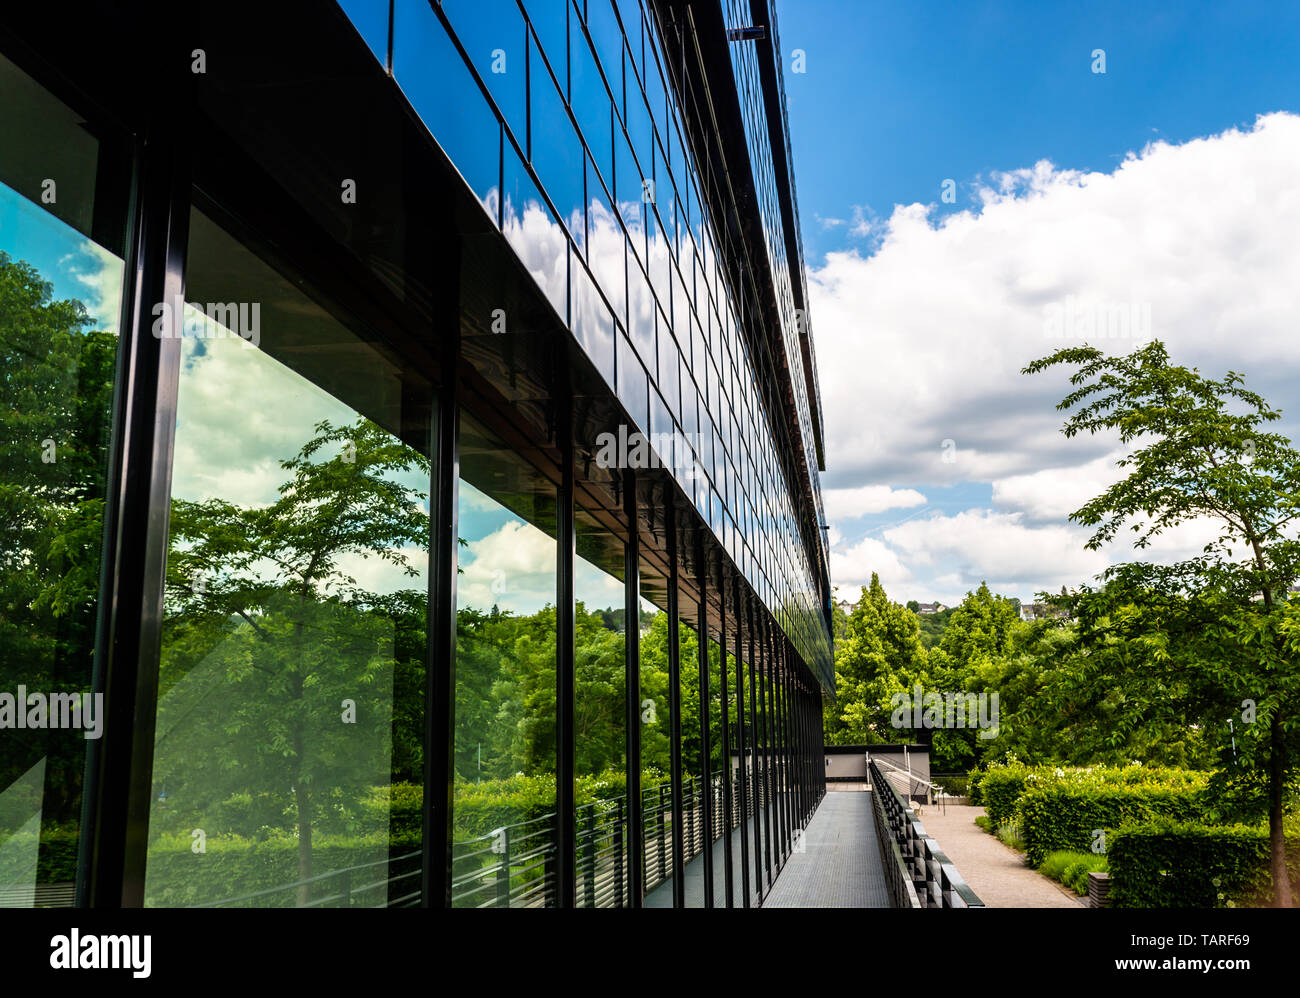 The facade of a modern building made of glass, blue panels in which the sky is reflected. Stock Photo